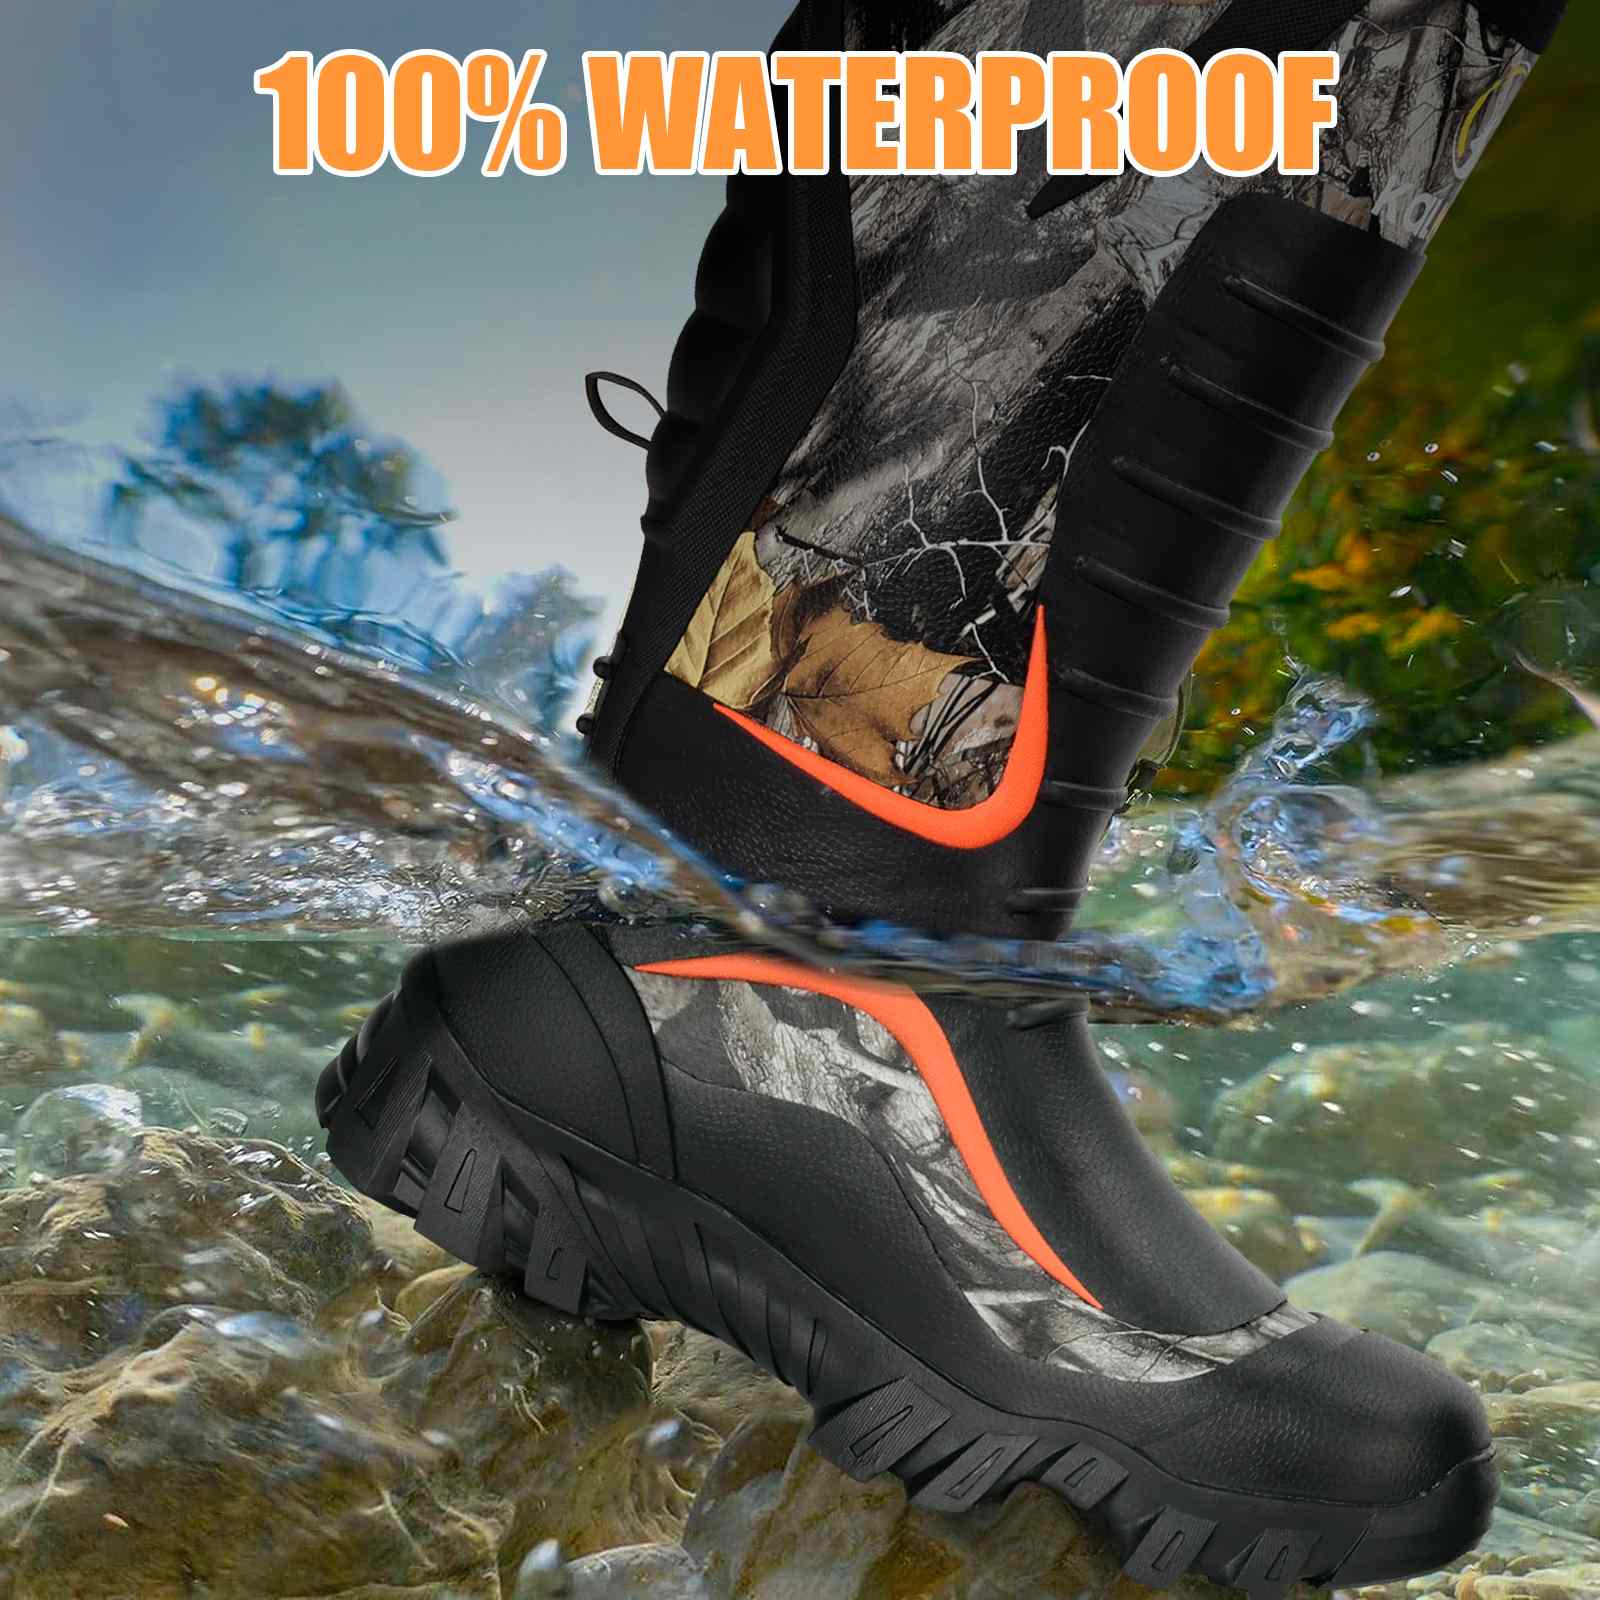  Fishing Shoes For Men Waterproof - Deck Boots For Men -  Short Rain Boots Men - Ideal Wader Boots For Wet Conditions - Mens Rubber  Boots - Duck Camo Size 8